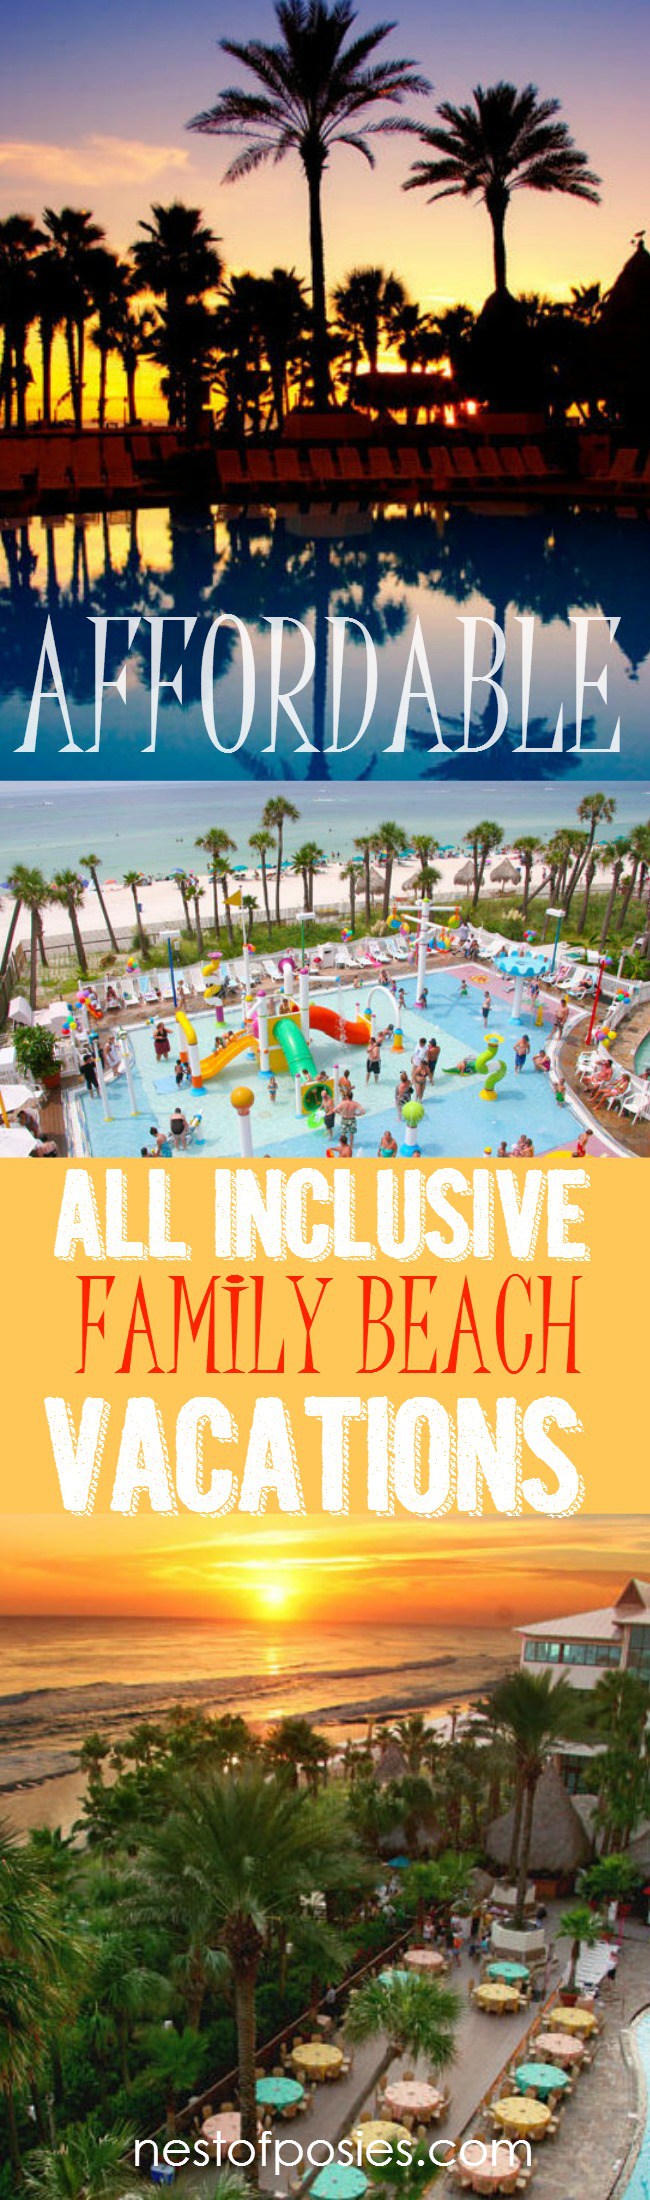 Affordable-All-Inclusive-Family-Beach-Vacations.-Meals-kids-activities-or-kids-camp-nightly-movies-ocean-front-and-so-much-more